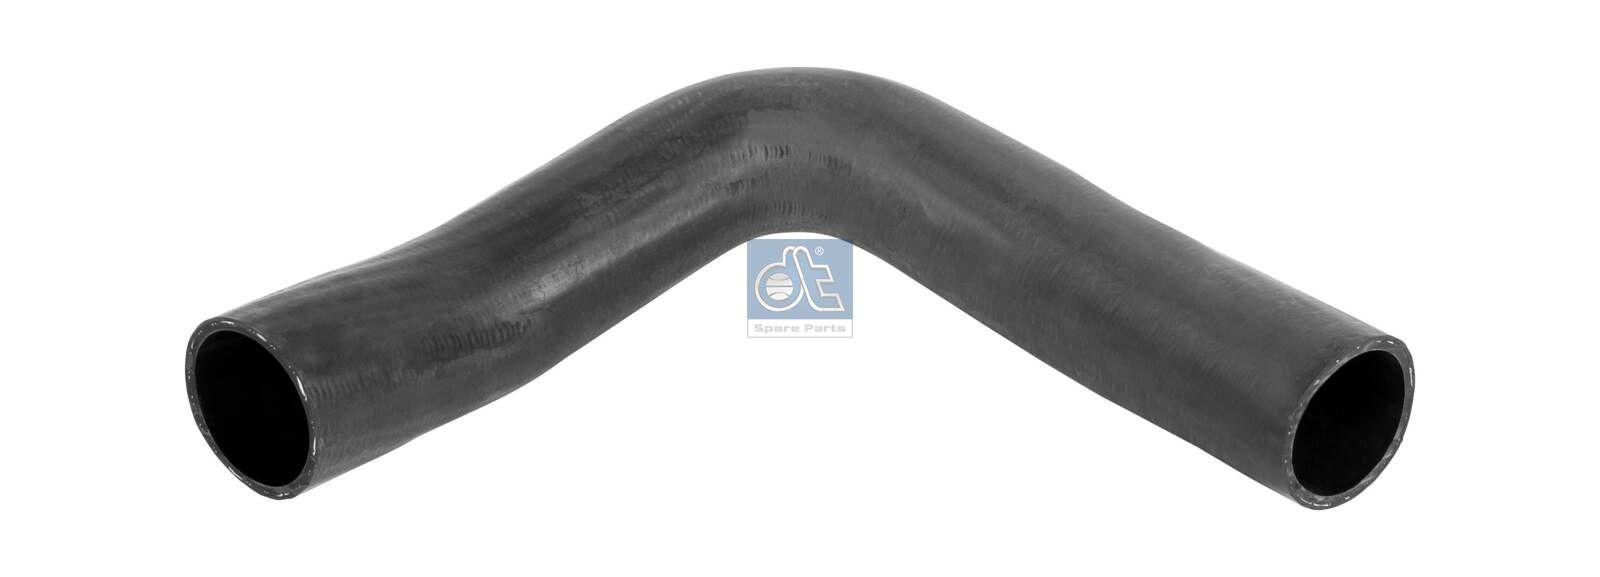 DT Spare Parts 59mm Thickness: 5mm Coolant Hose 3.16449 buy